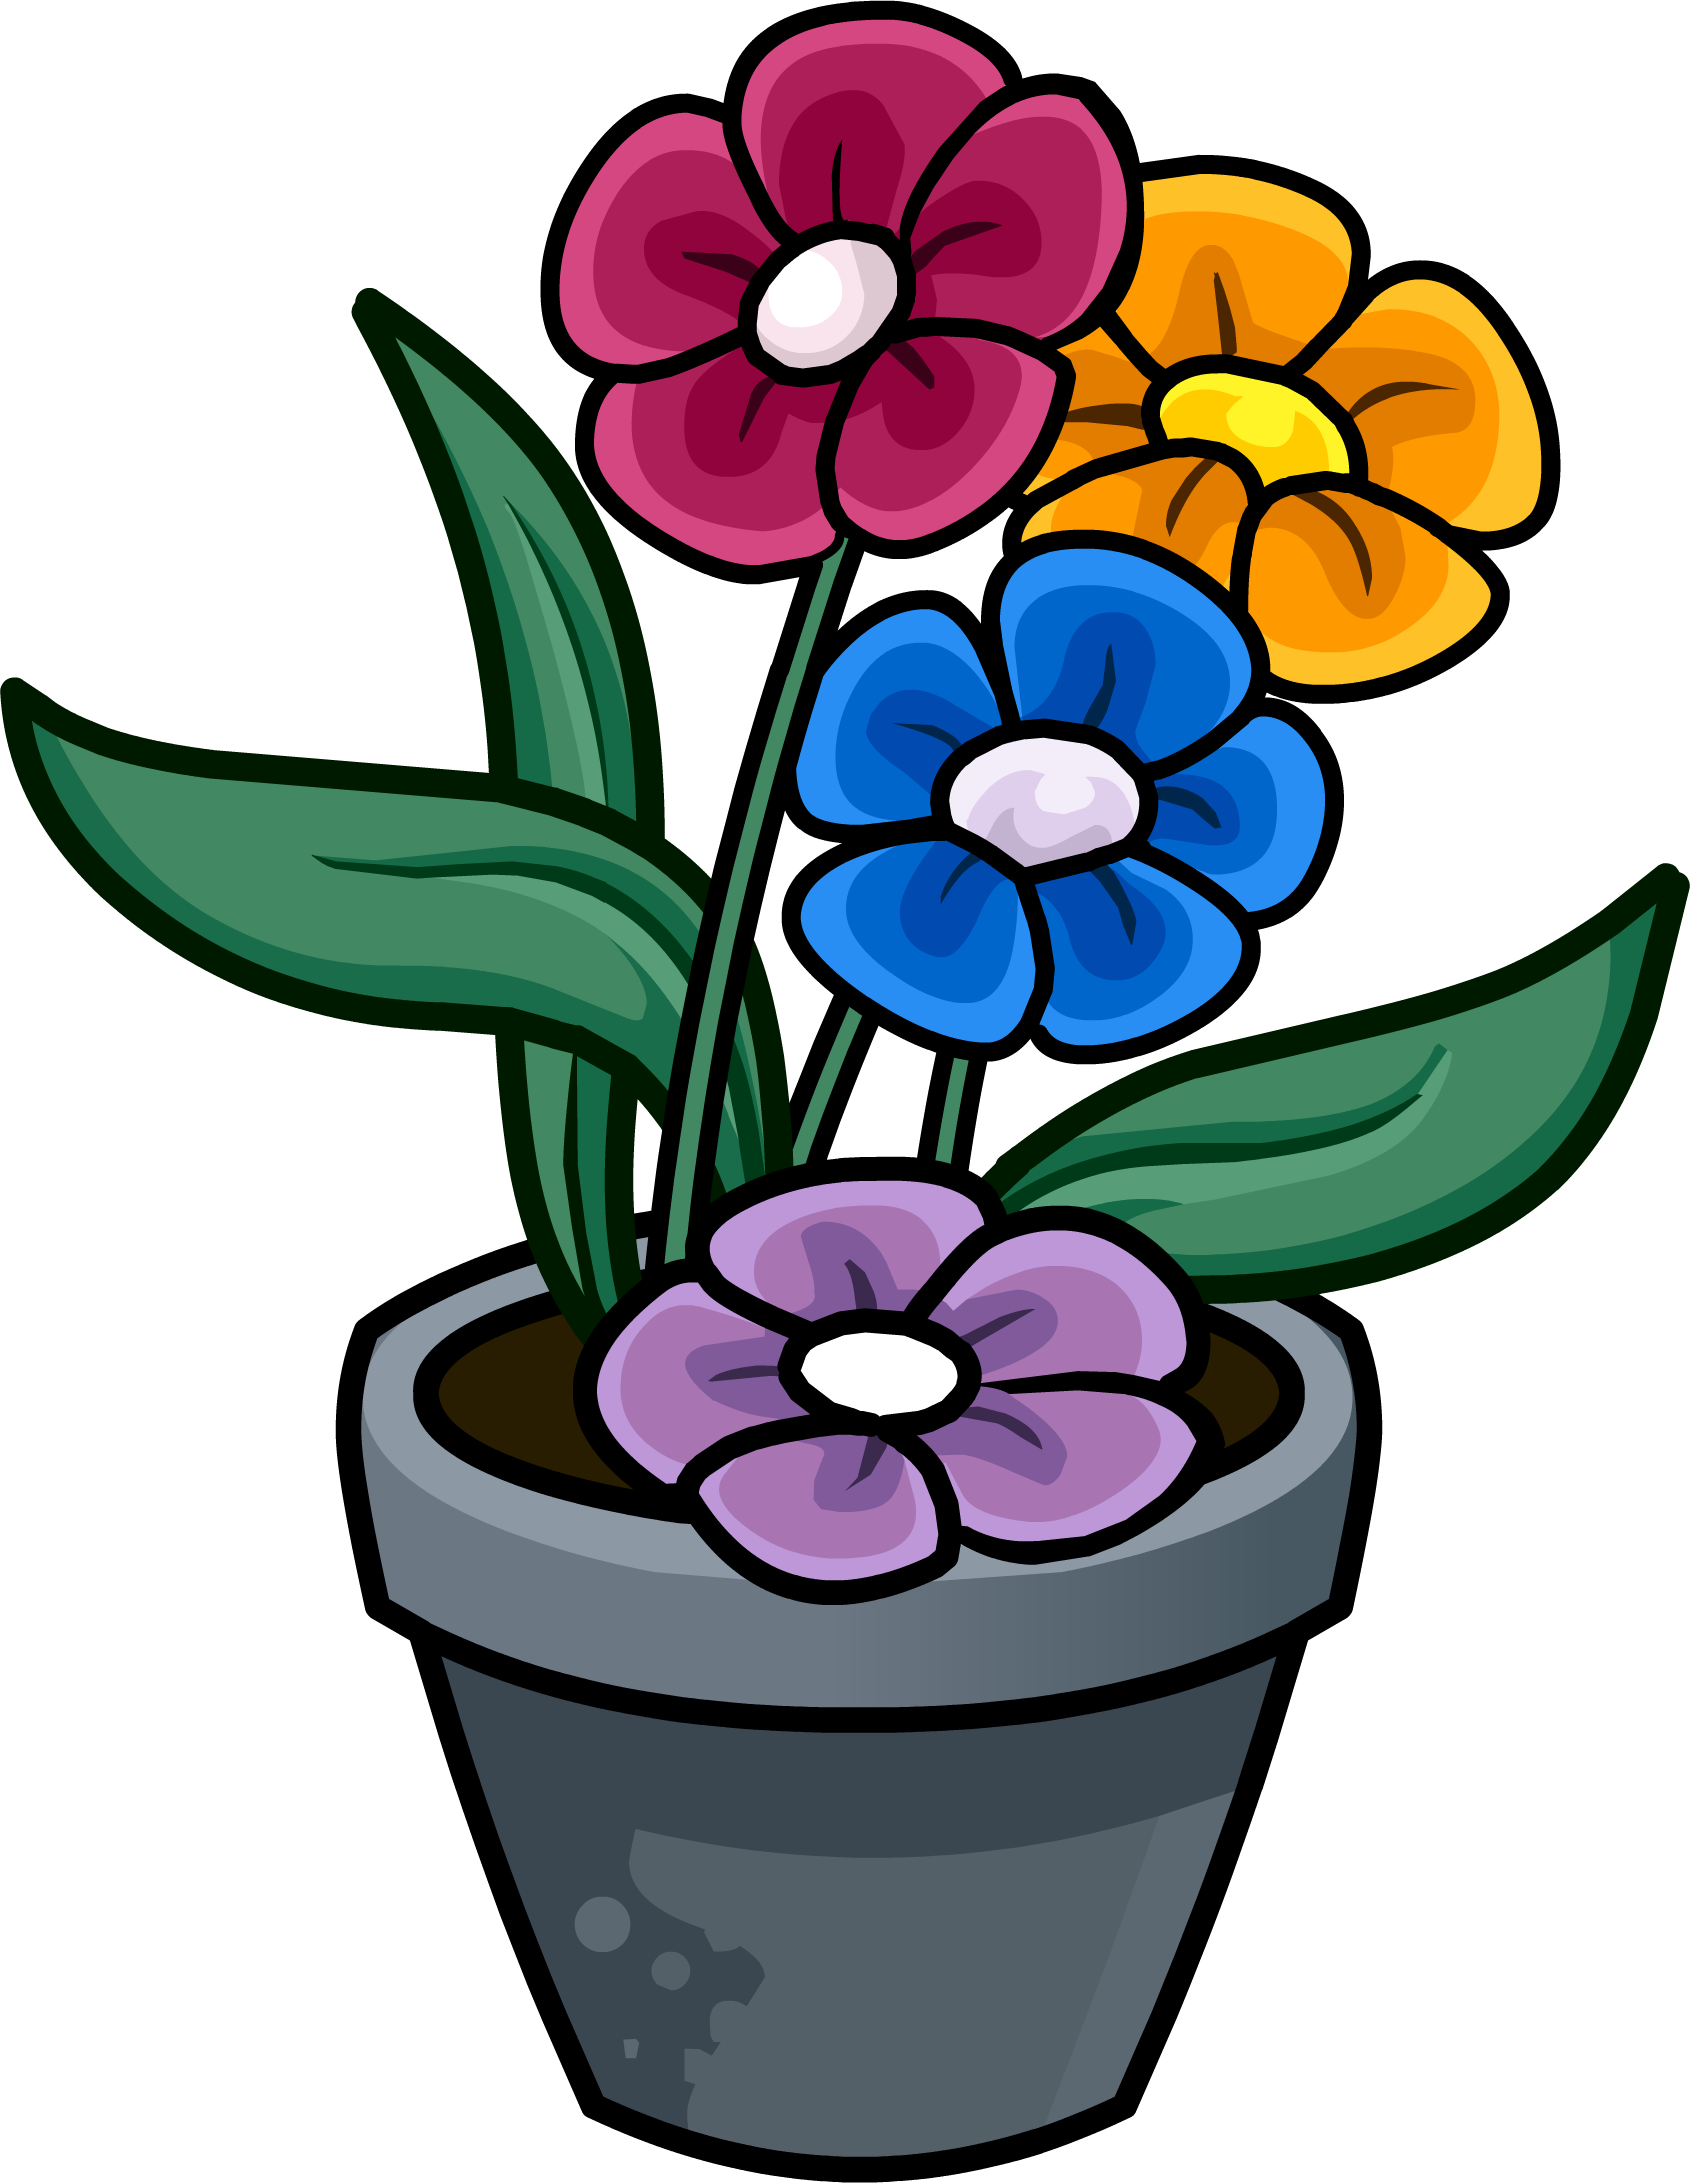 Flower Pot - Club Penguin Wiki - The free, editable encyclopedia about ...